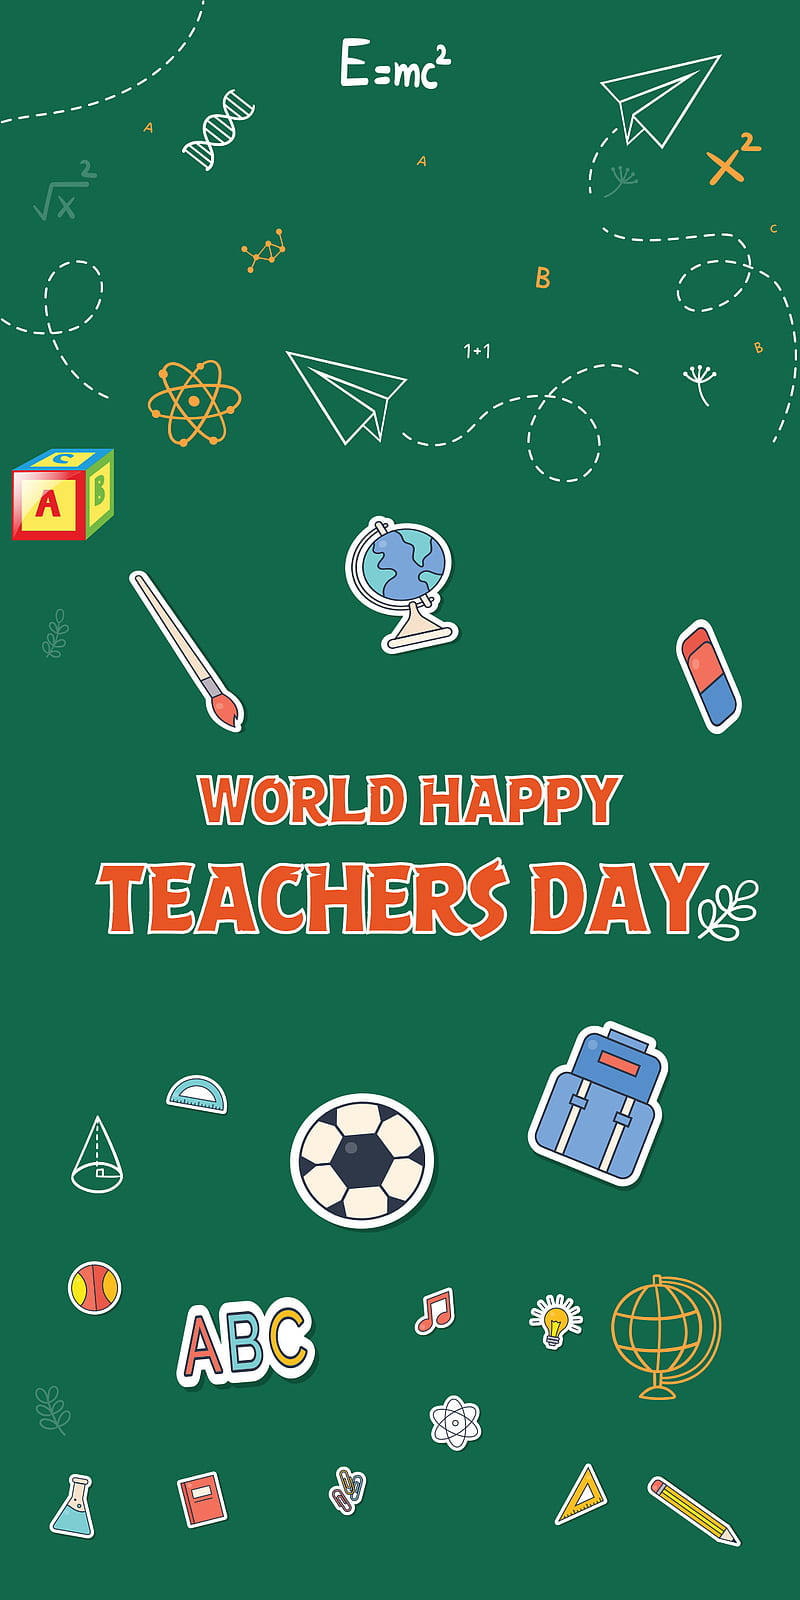 90 Teachers Day Wishes Stock Photos Pictures  RoyaltyFree Images   iStock